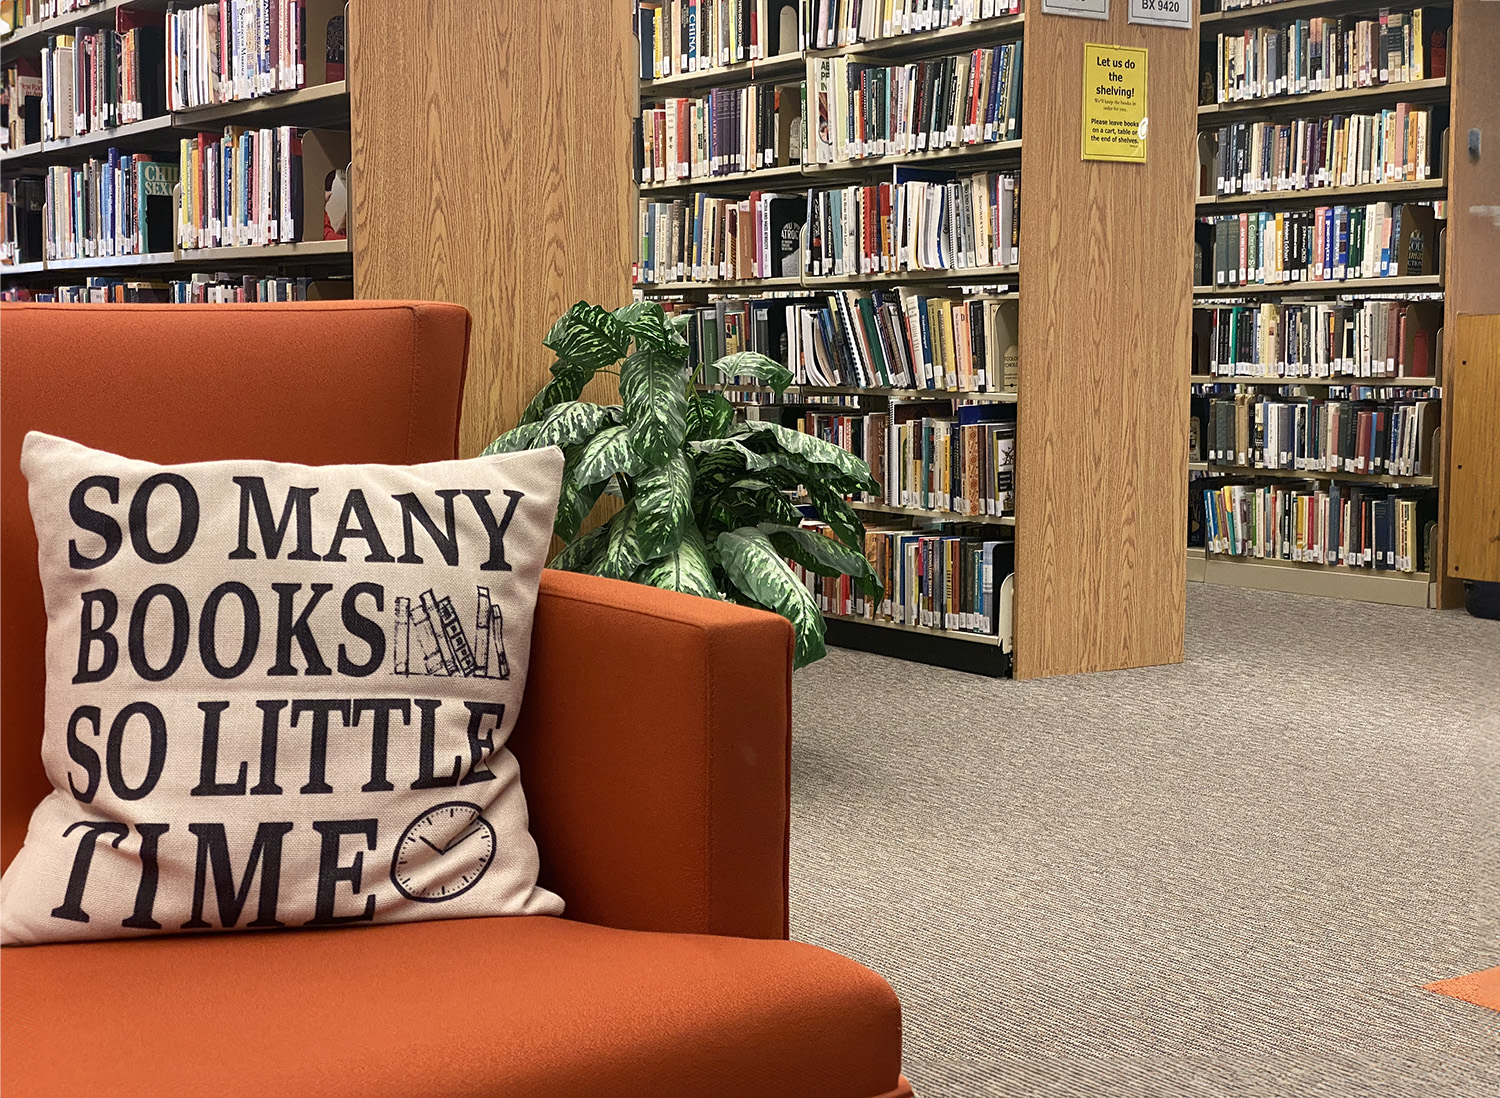 A cushion on a chair reads So many books, so little time.